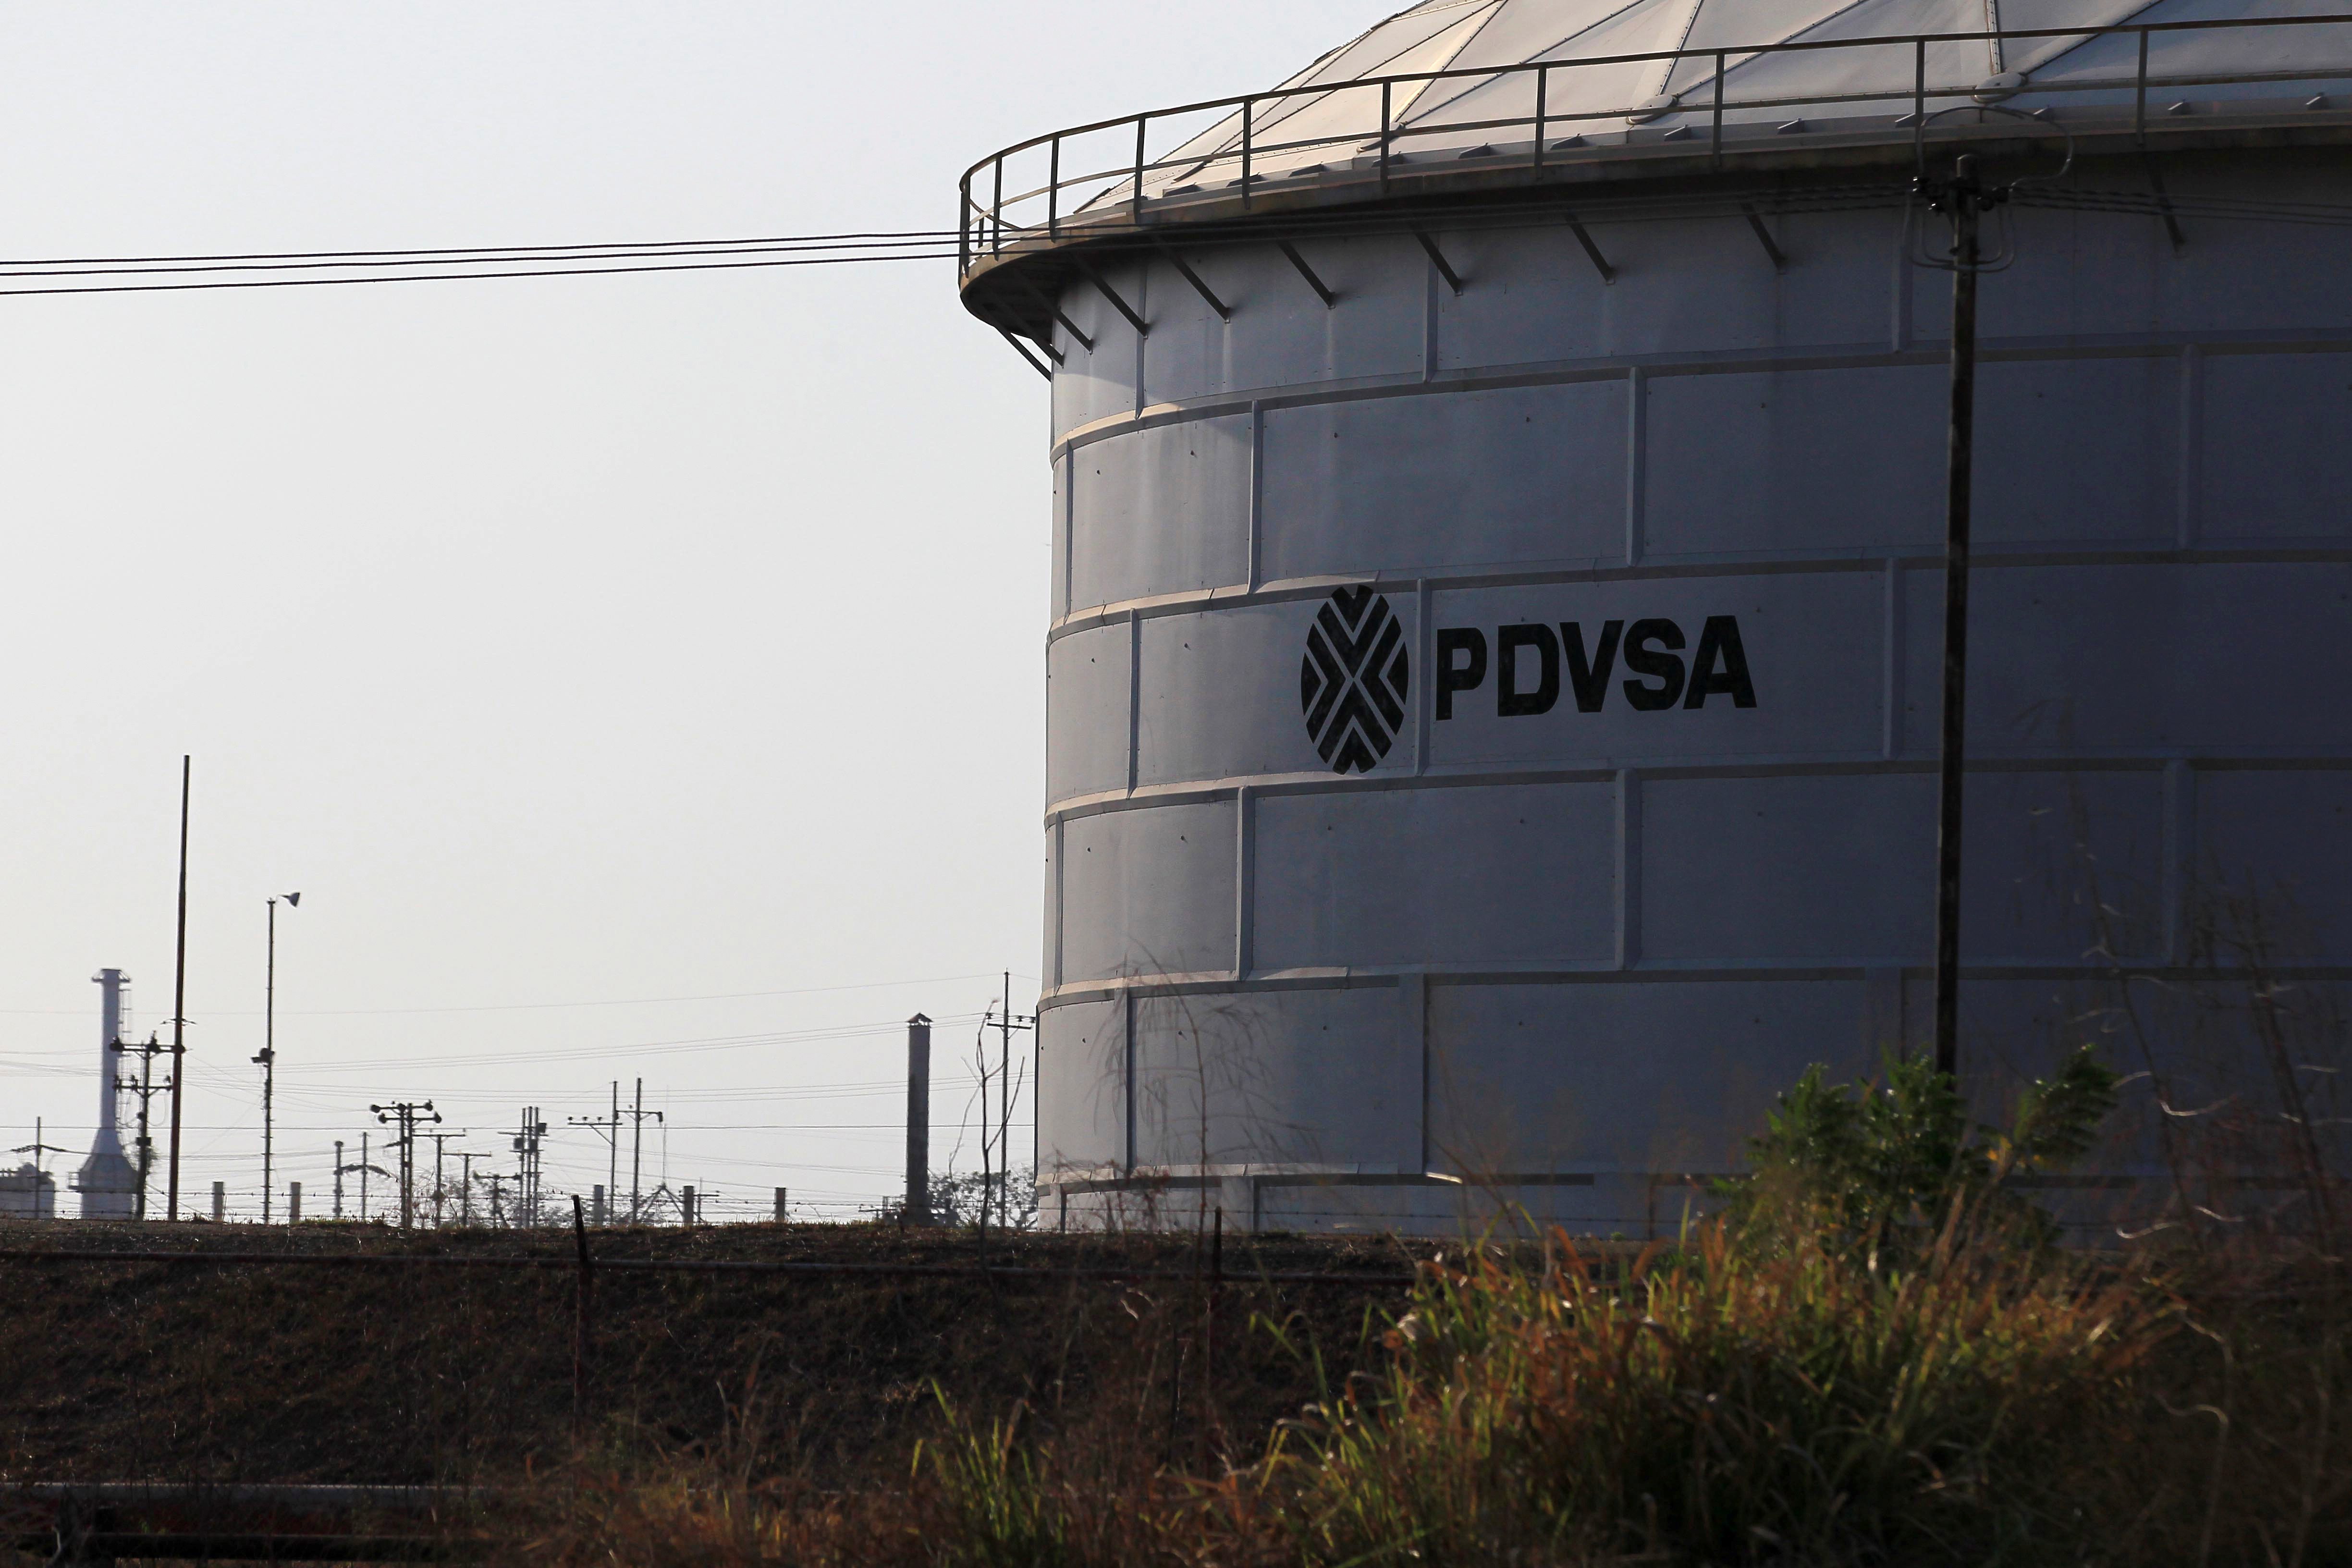 The corporate logo of state oil company PDVSA is seen on a tank at an oil facility in Lagunillas